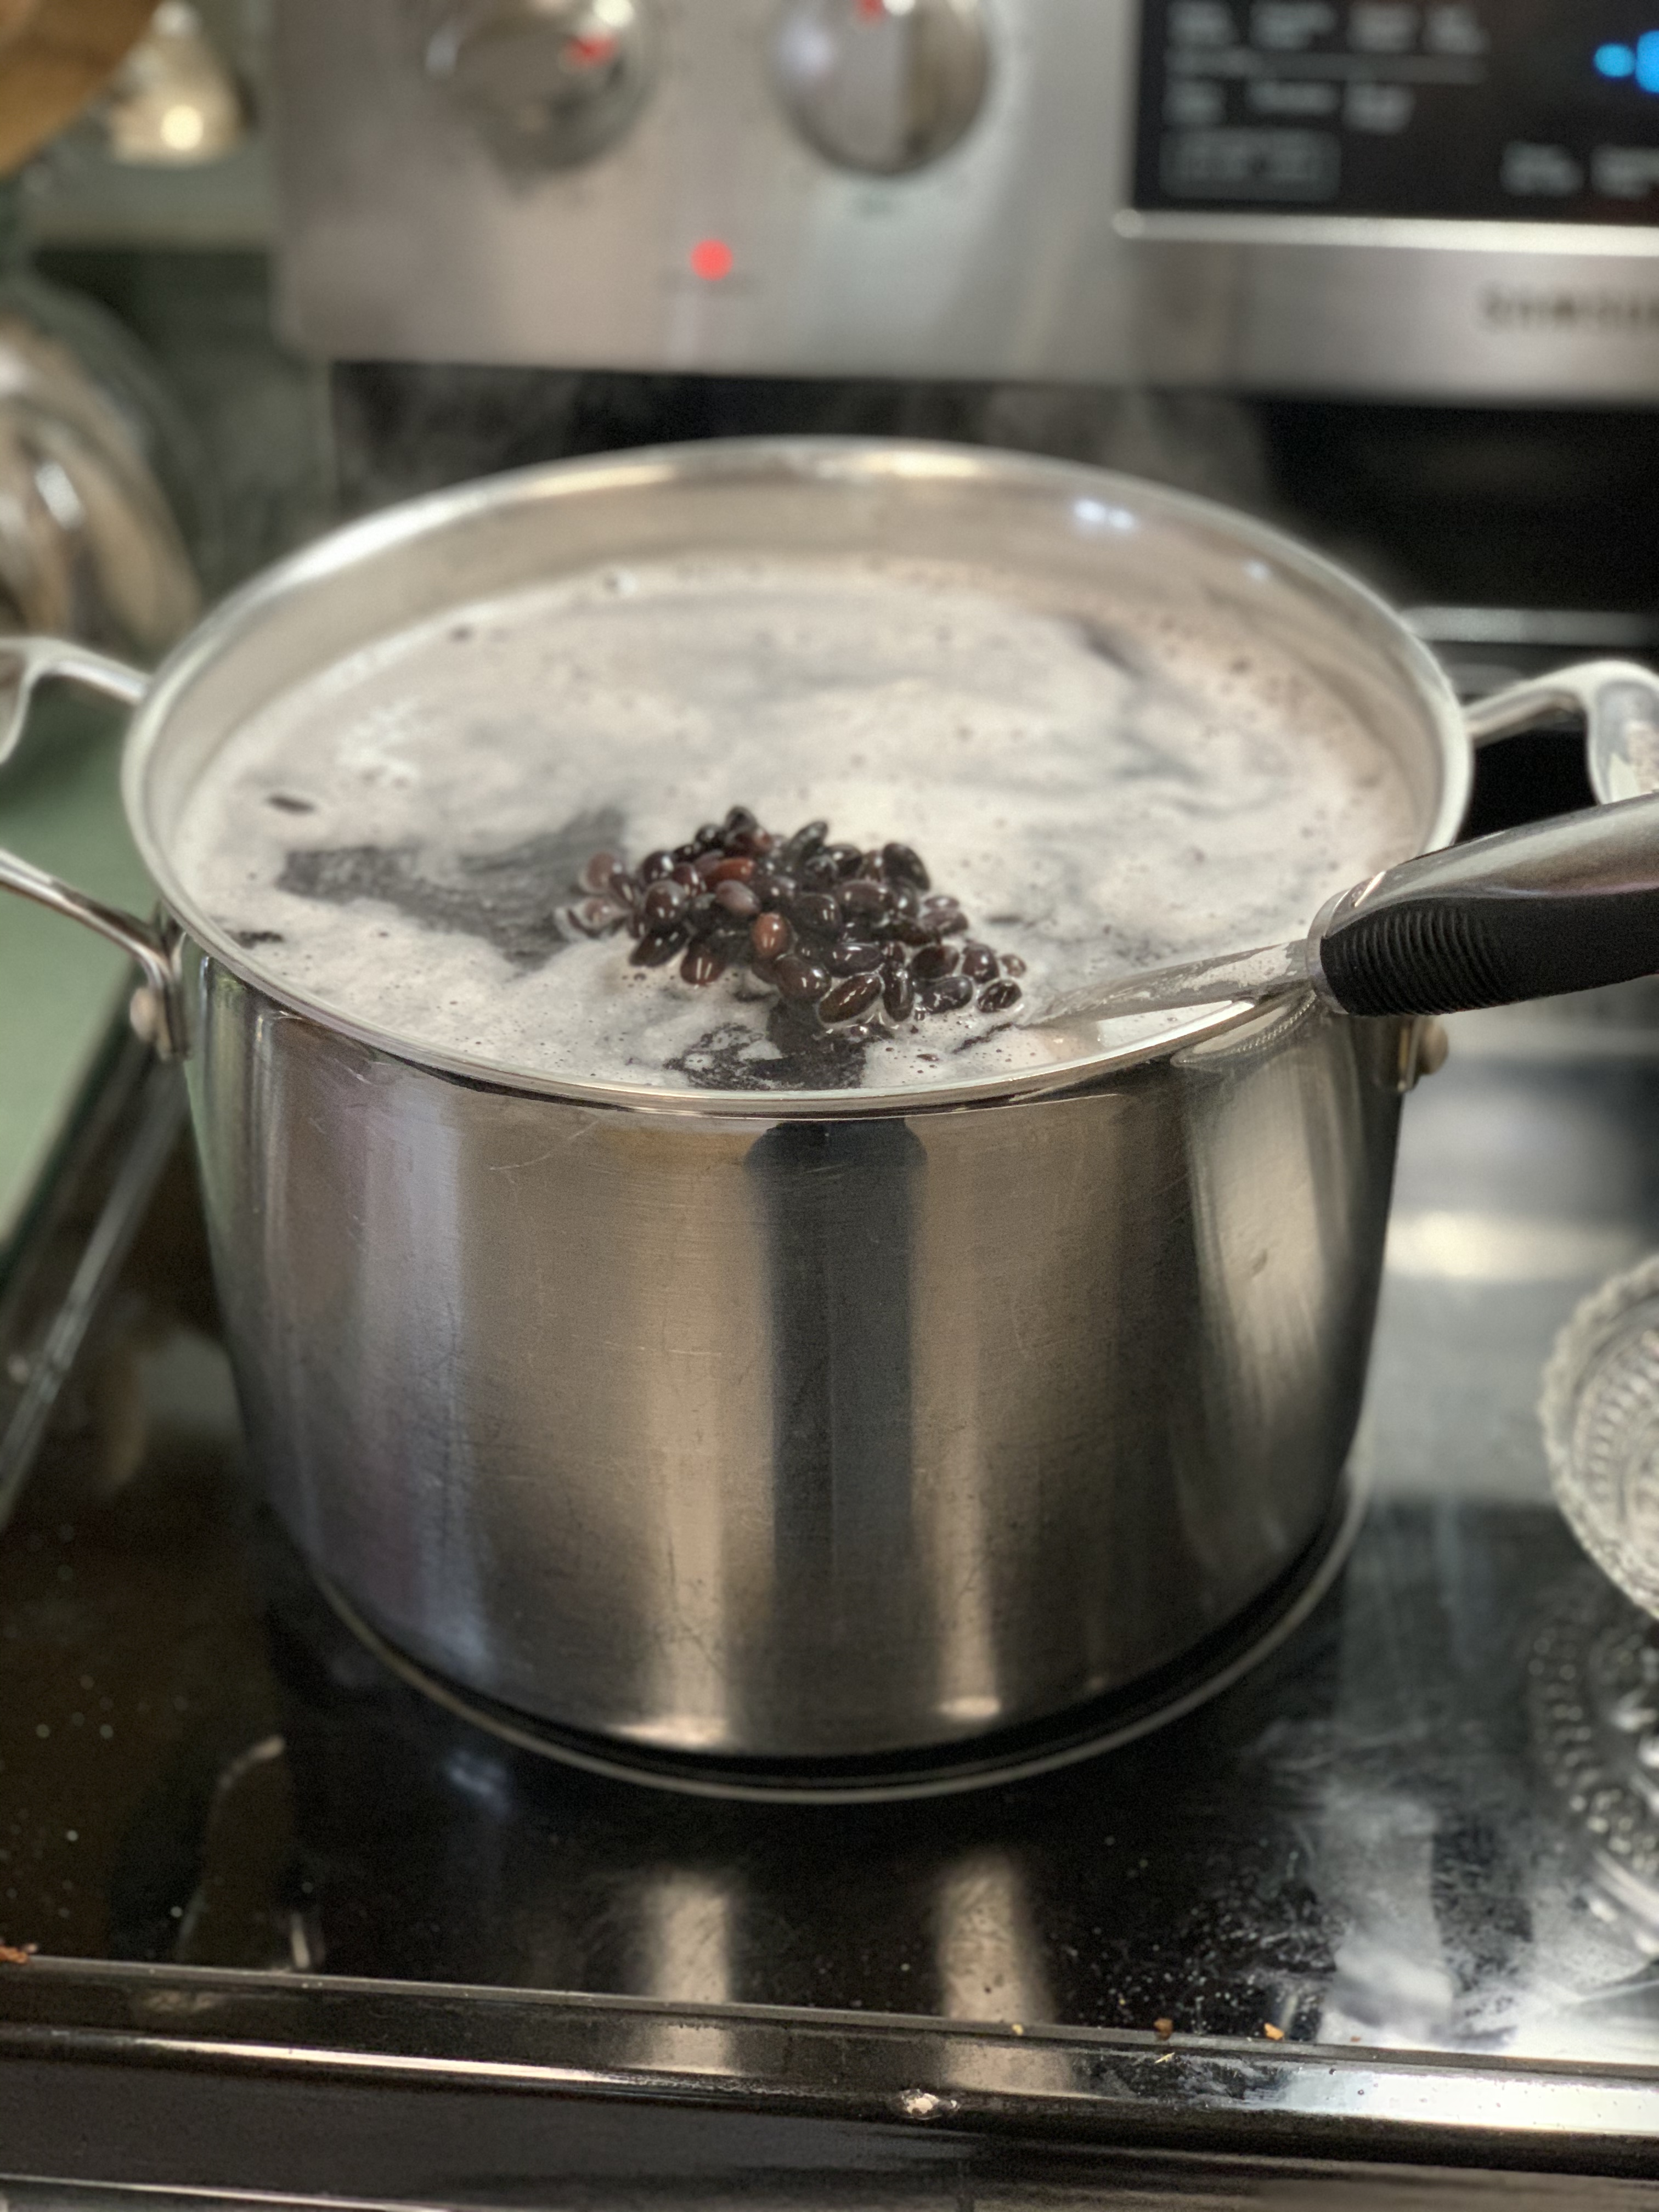 Big pot of Black beans, rinsed and heating on the stove